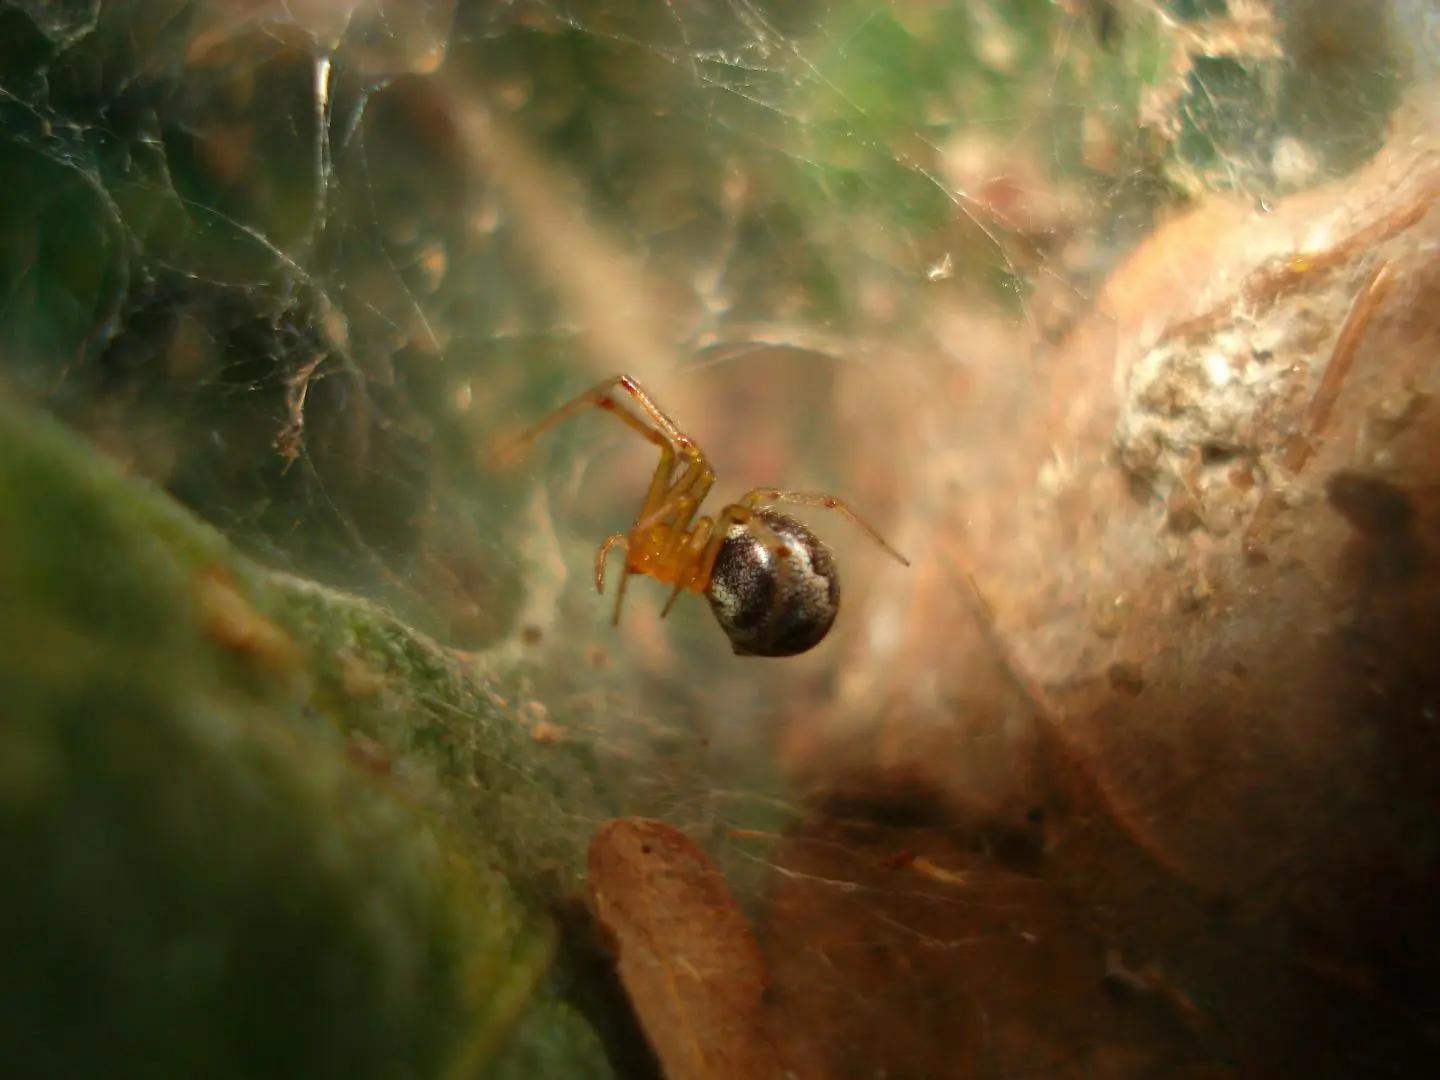 Here's what happens to the spiders when a hurricane hits